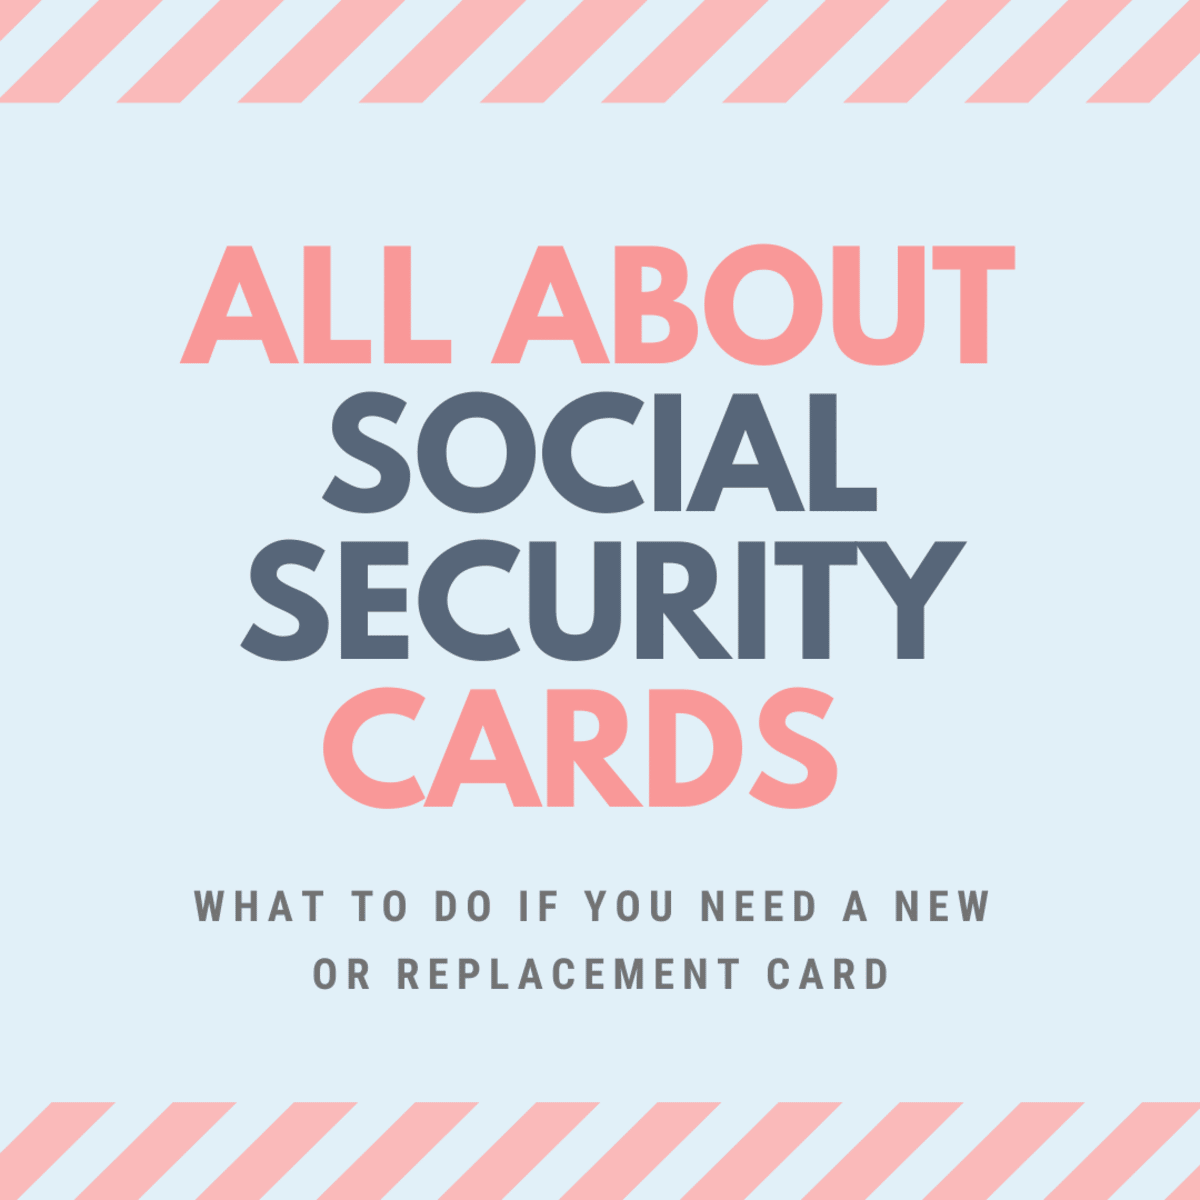 United States Social Security: How to Get a New or Replacement Card ...